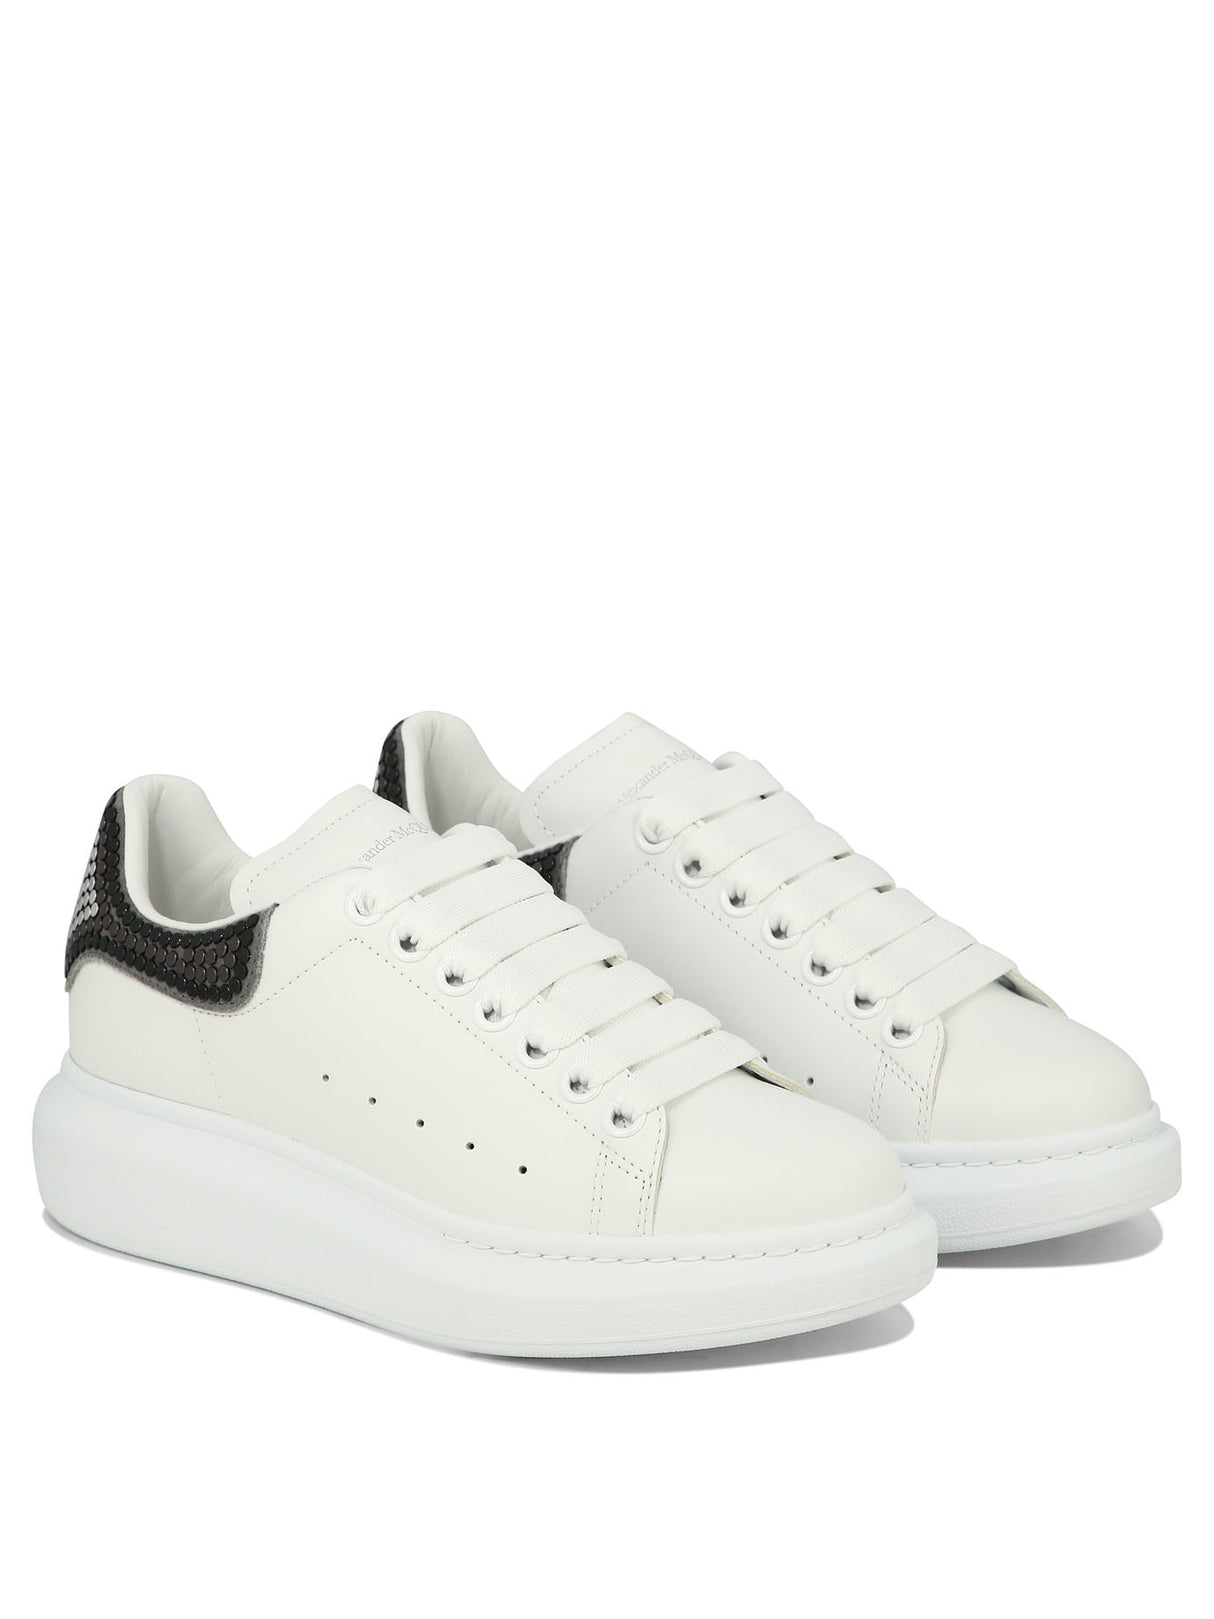 ALEXANDER MCQUEEN Oversize Lace Up White Sneakers for Women